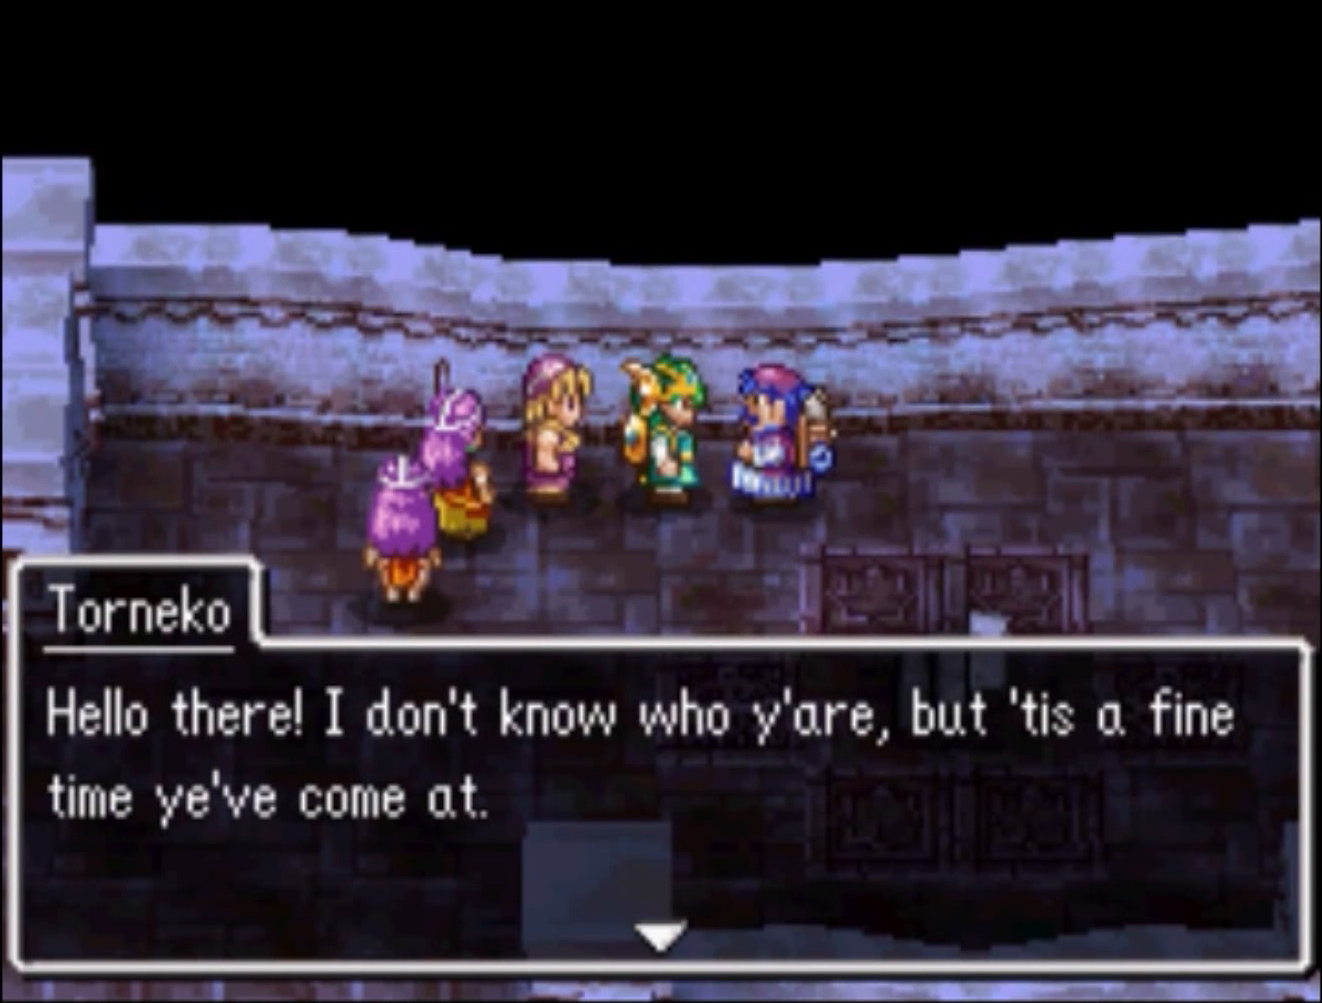 Torneko is also here, but he won’t join you yet | Dragon Quest IV